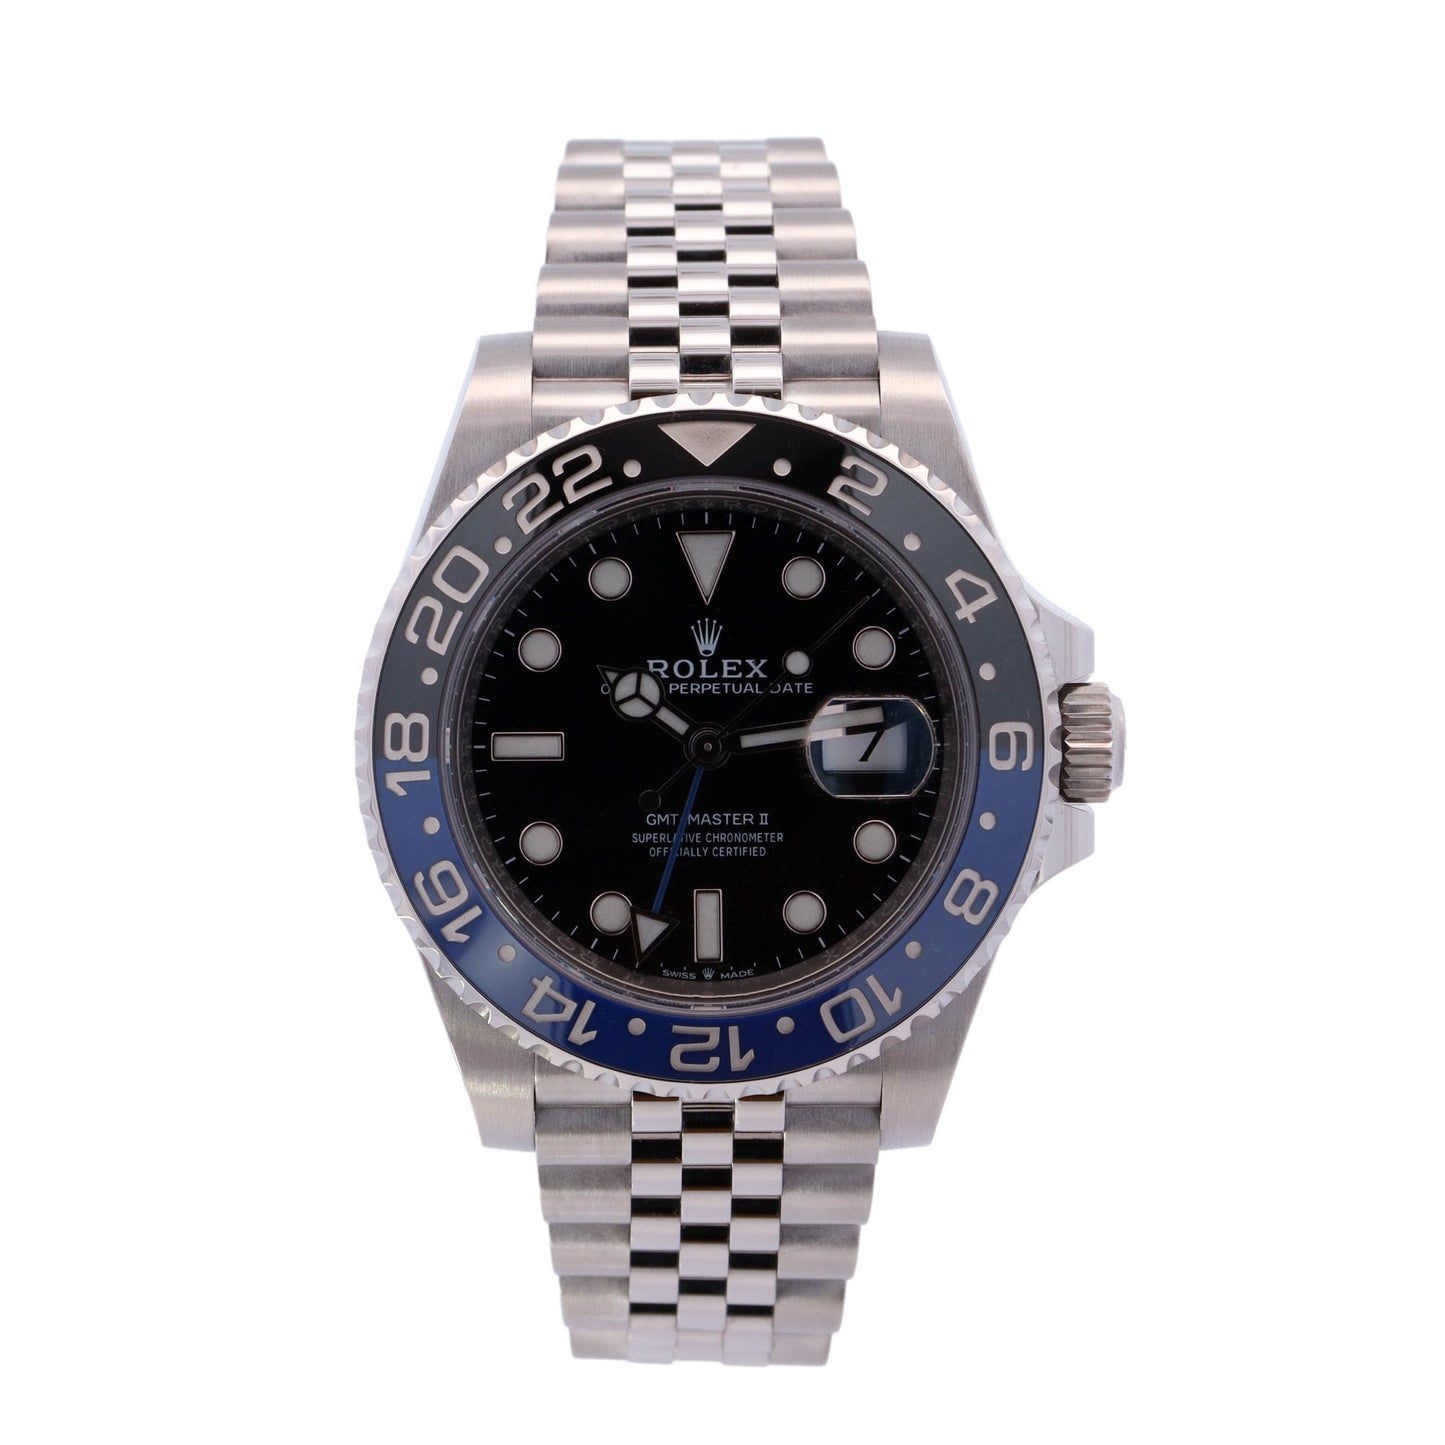 Rolex GMT Master "Batgirl" Stainless Steel 40mm Black Dot Dial Watch Reference #: 126710BLNR - Happy Jewelers Fine Jewelry Lifetime Warranty